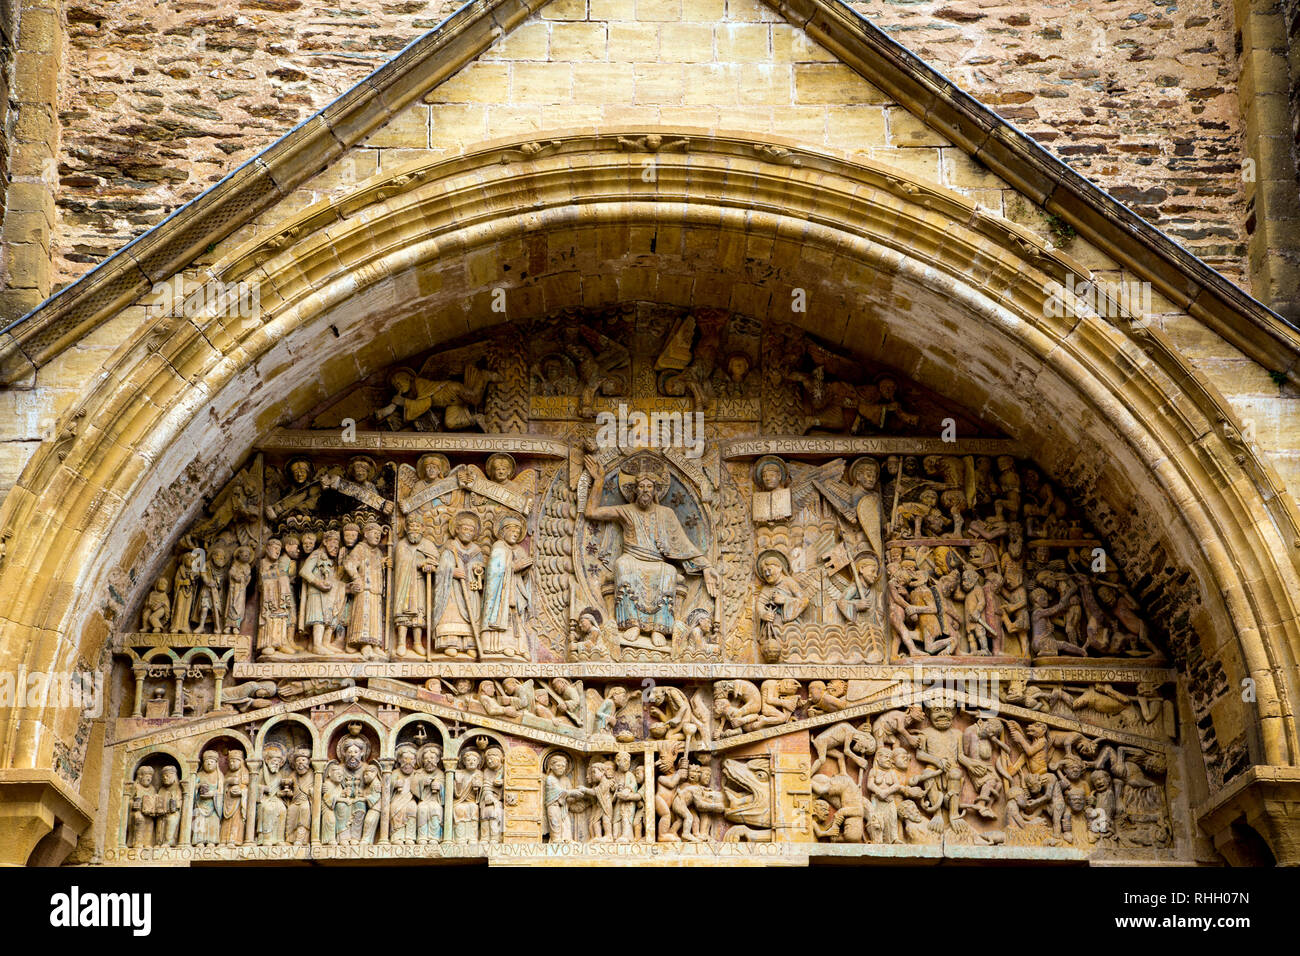 Romanesque carving of the Last Judgment in the tympanum over the main doors of Abbaye Sainte-Foy de Conques in France. Stock Photo